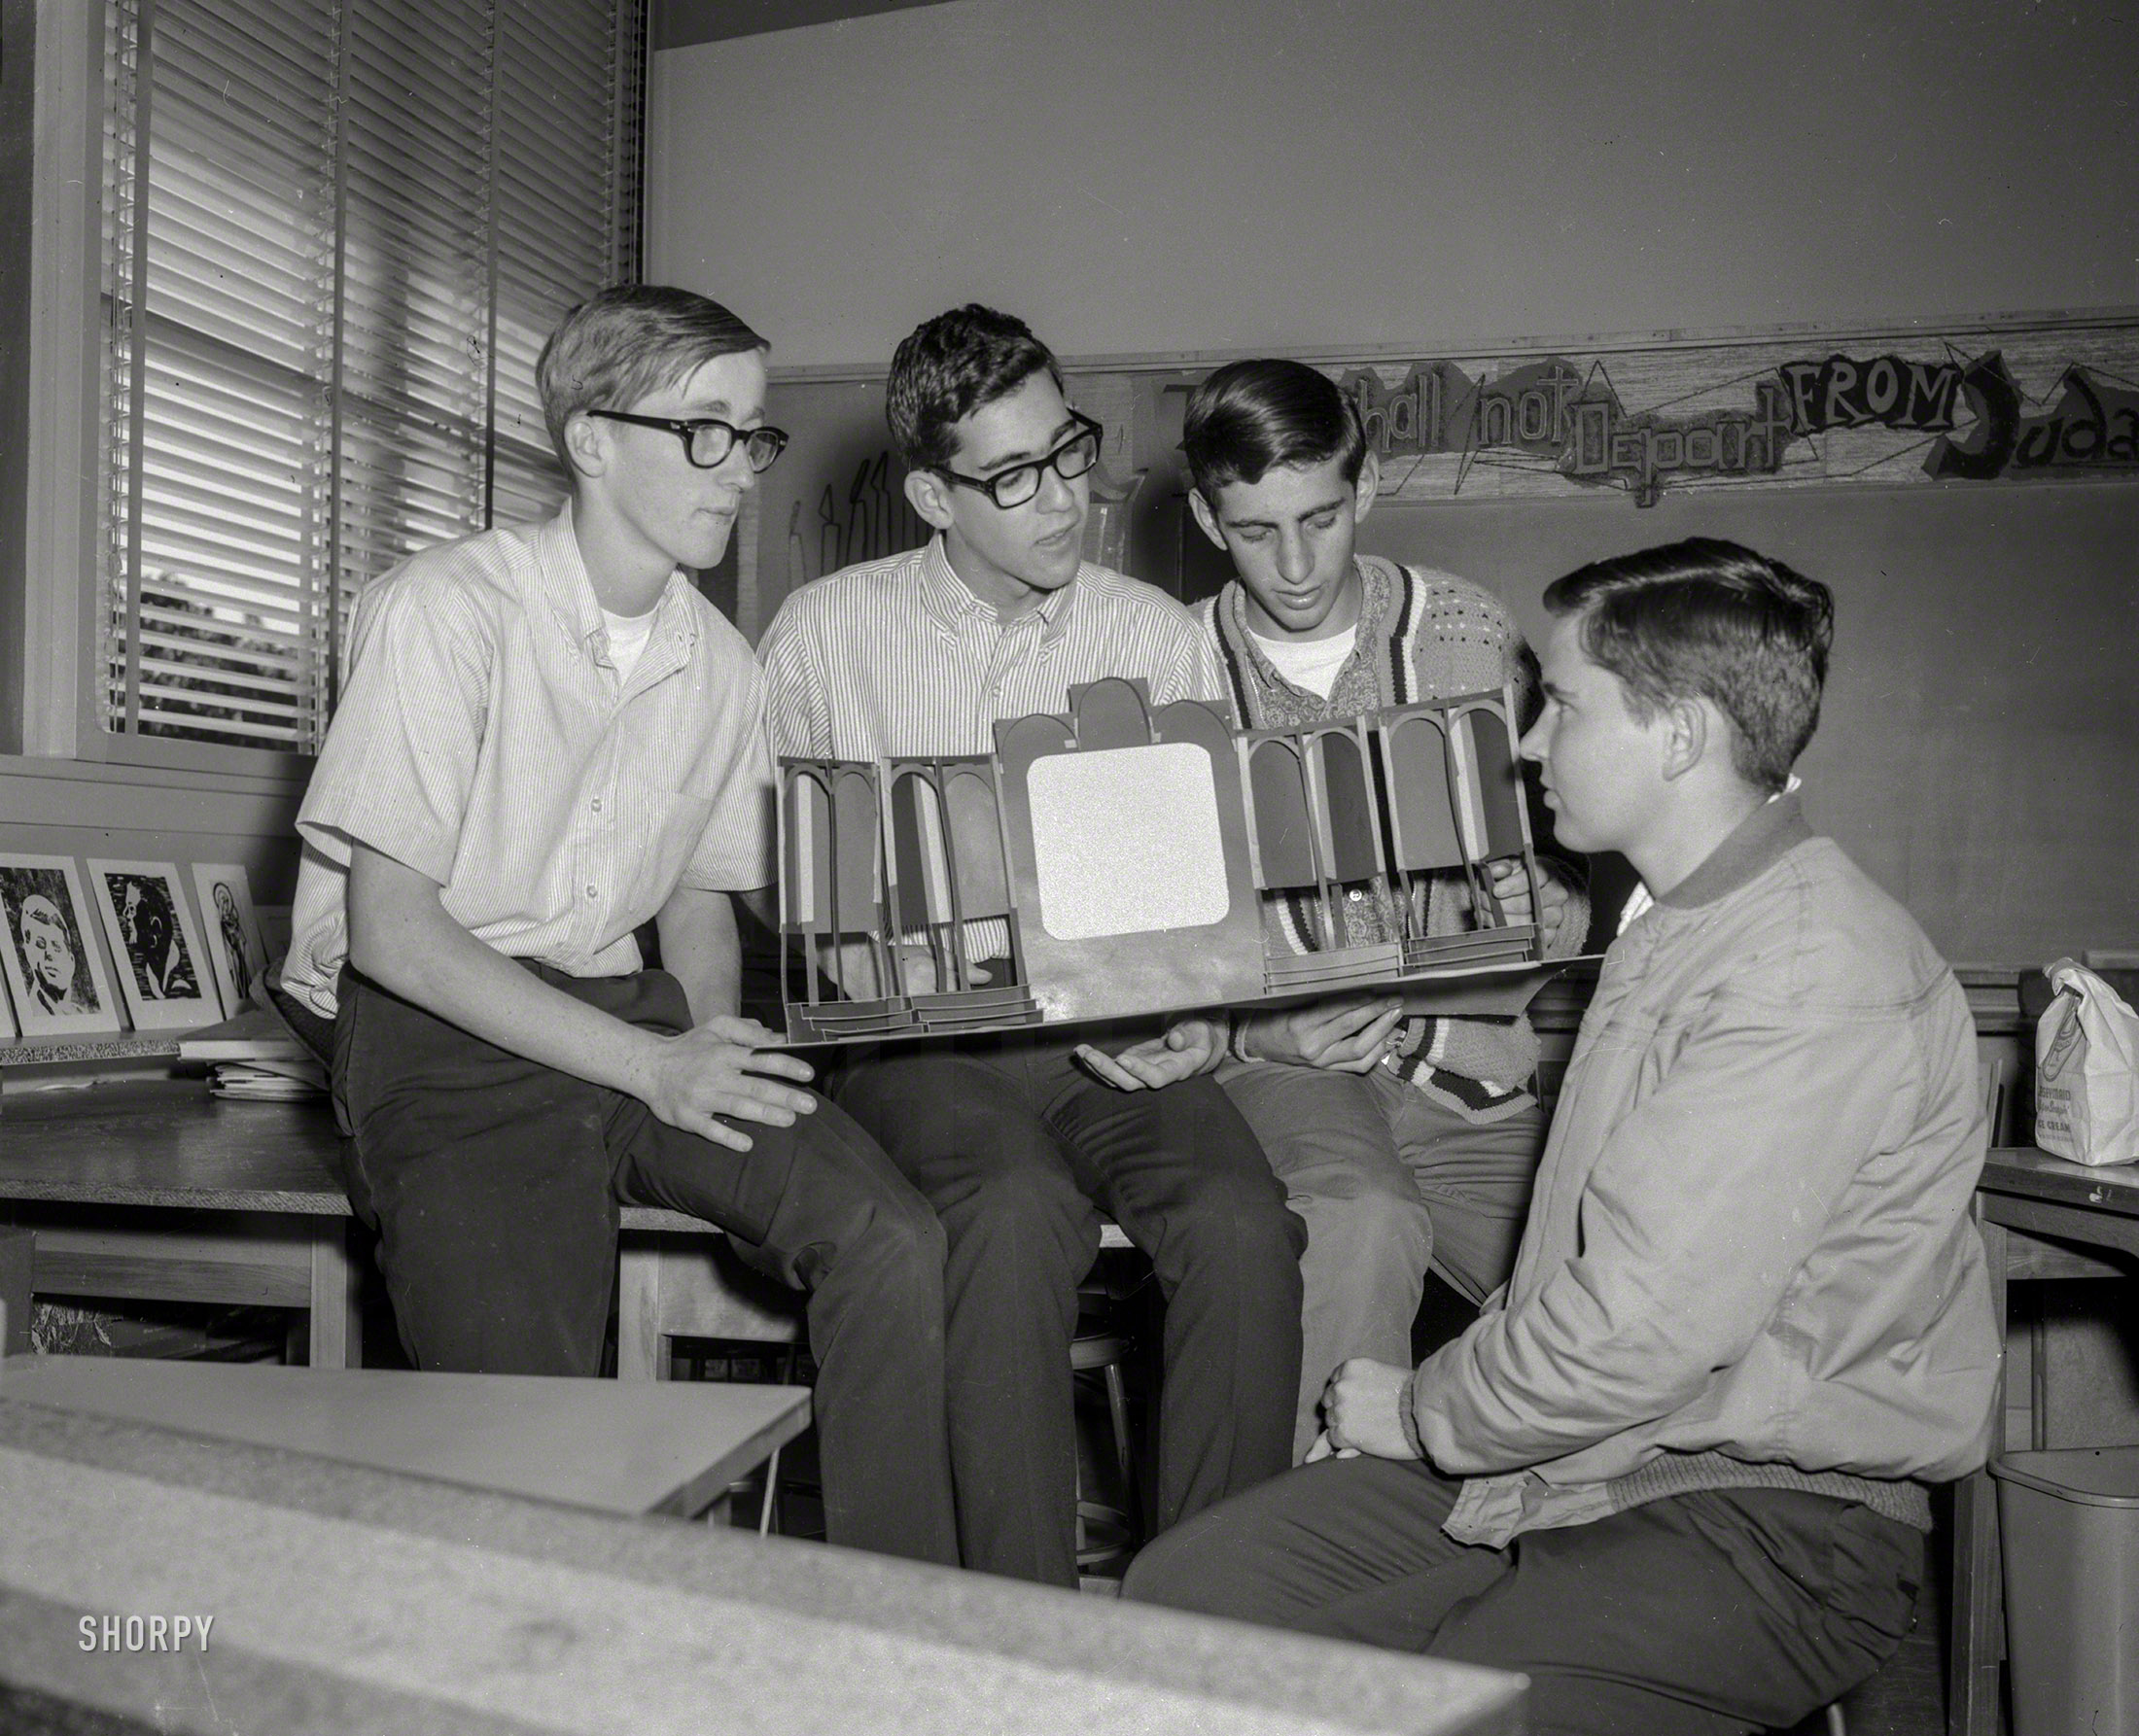 Columbus, Georgia, circa 1962. "Youth Club boys." This has all the earmarks of a church project. 4x5 negative from the News Archive. View full size.